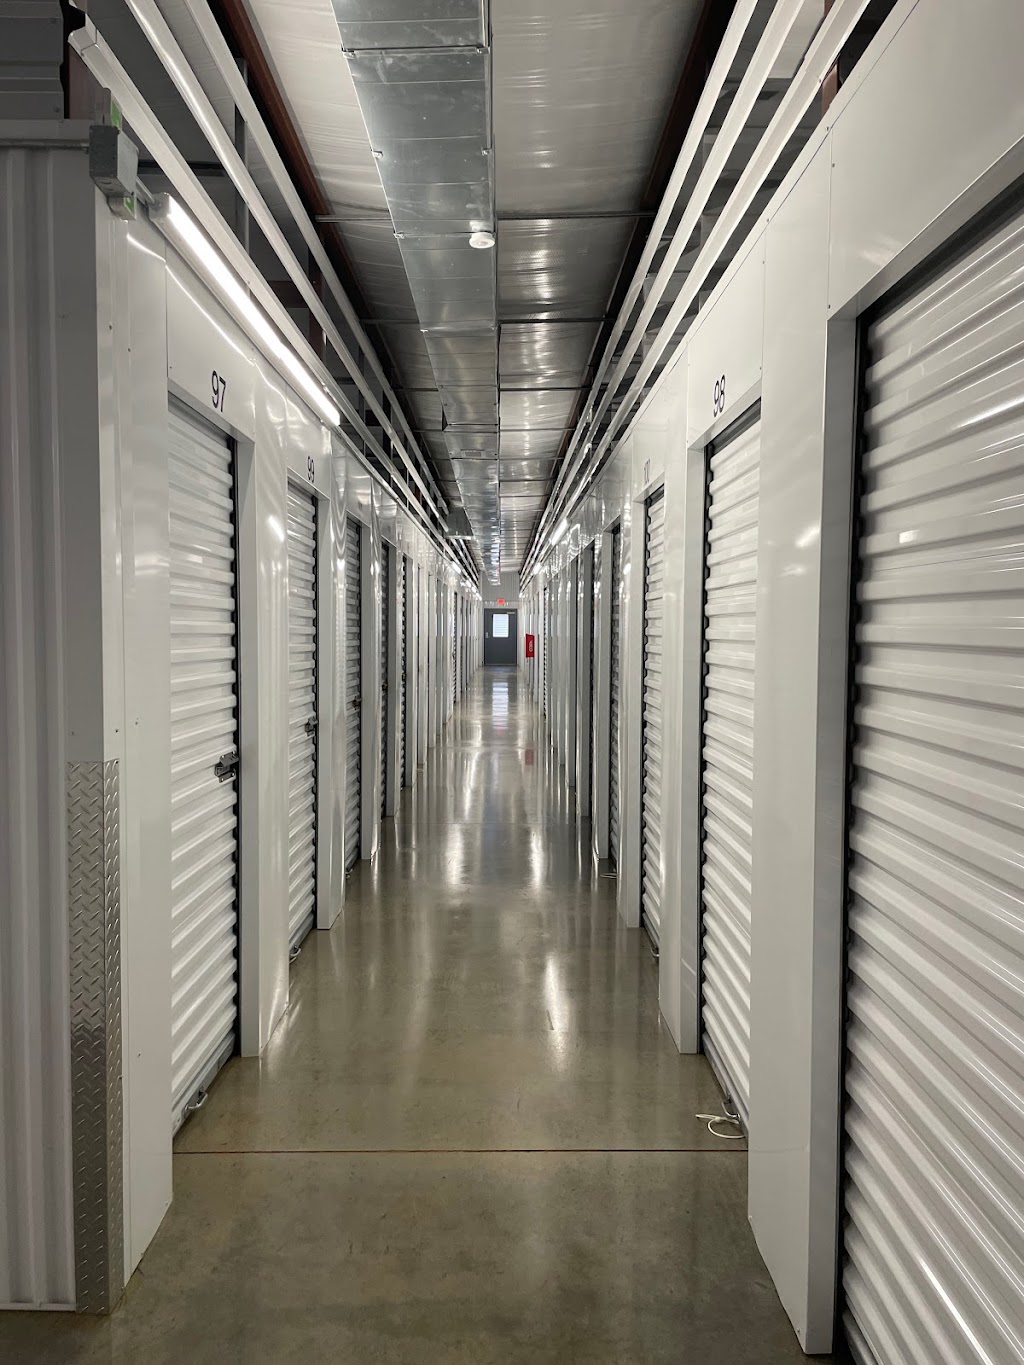 McStor Self Storage | 104 Tarboro Rd, Youngsville, NC 27596, USA | Phone: (919) 886-6911